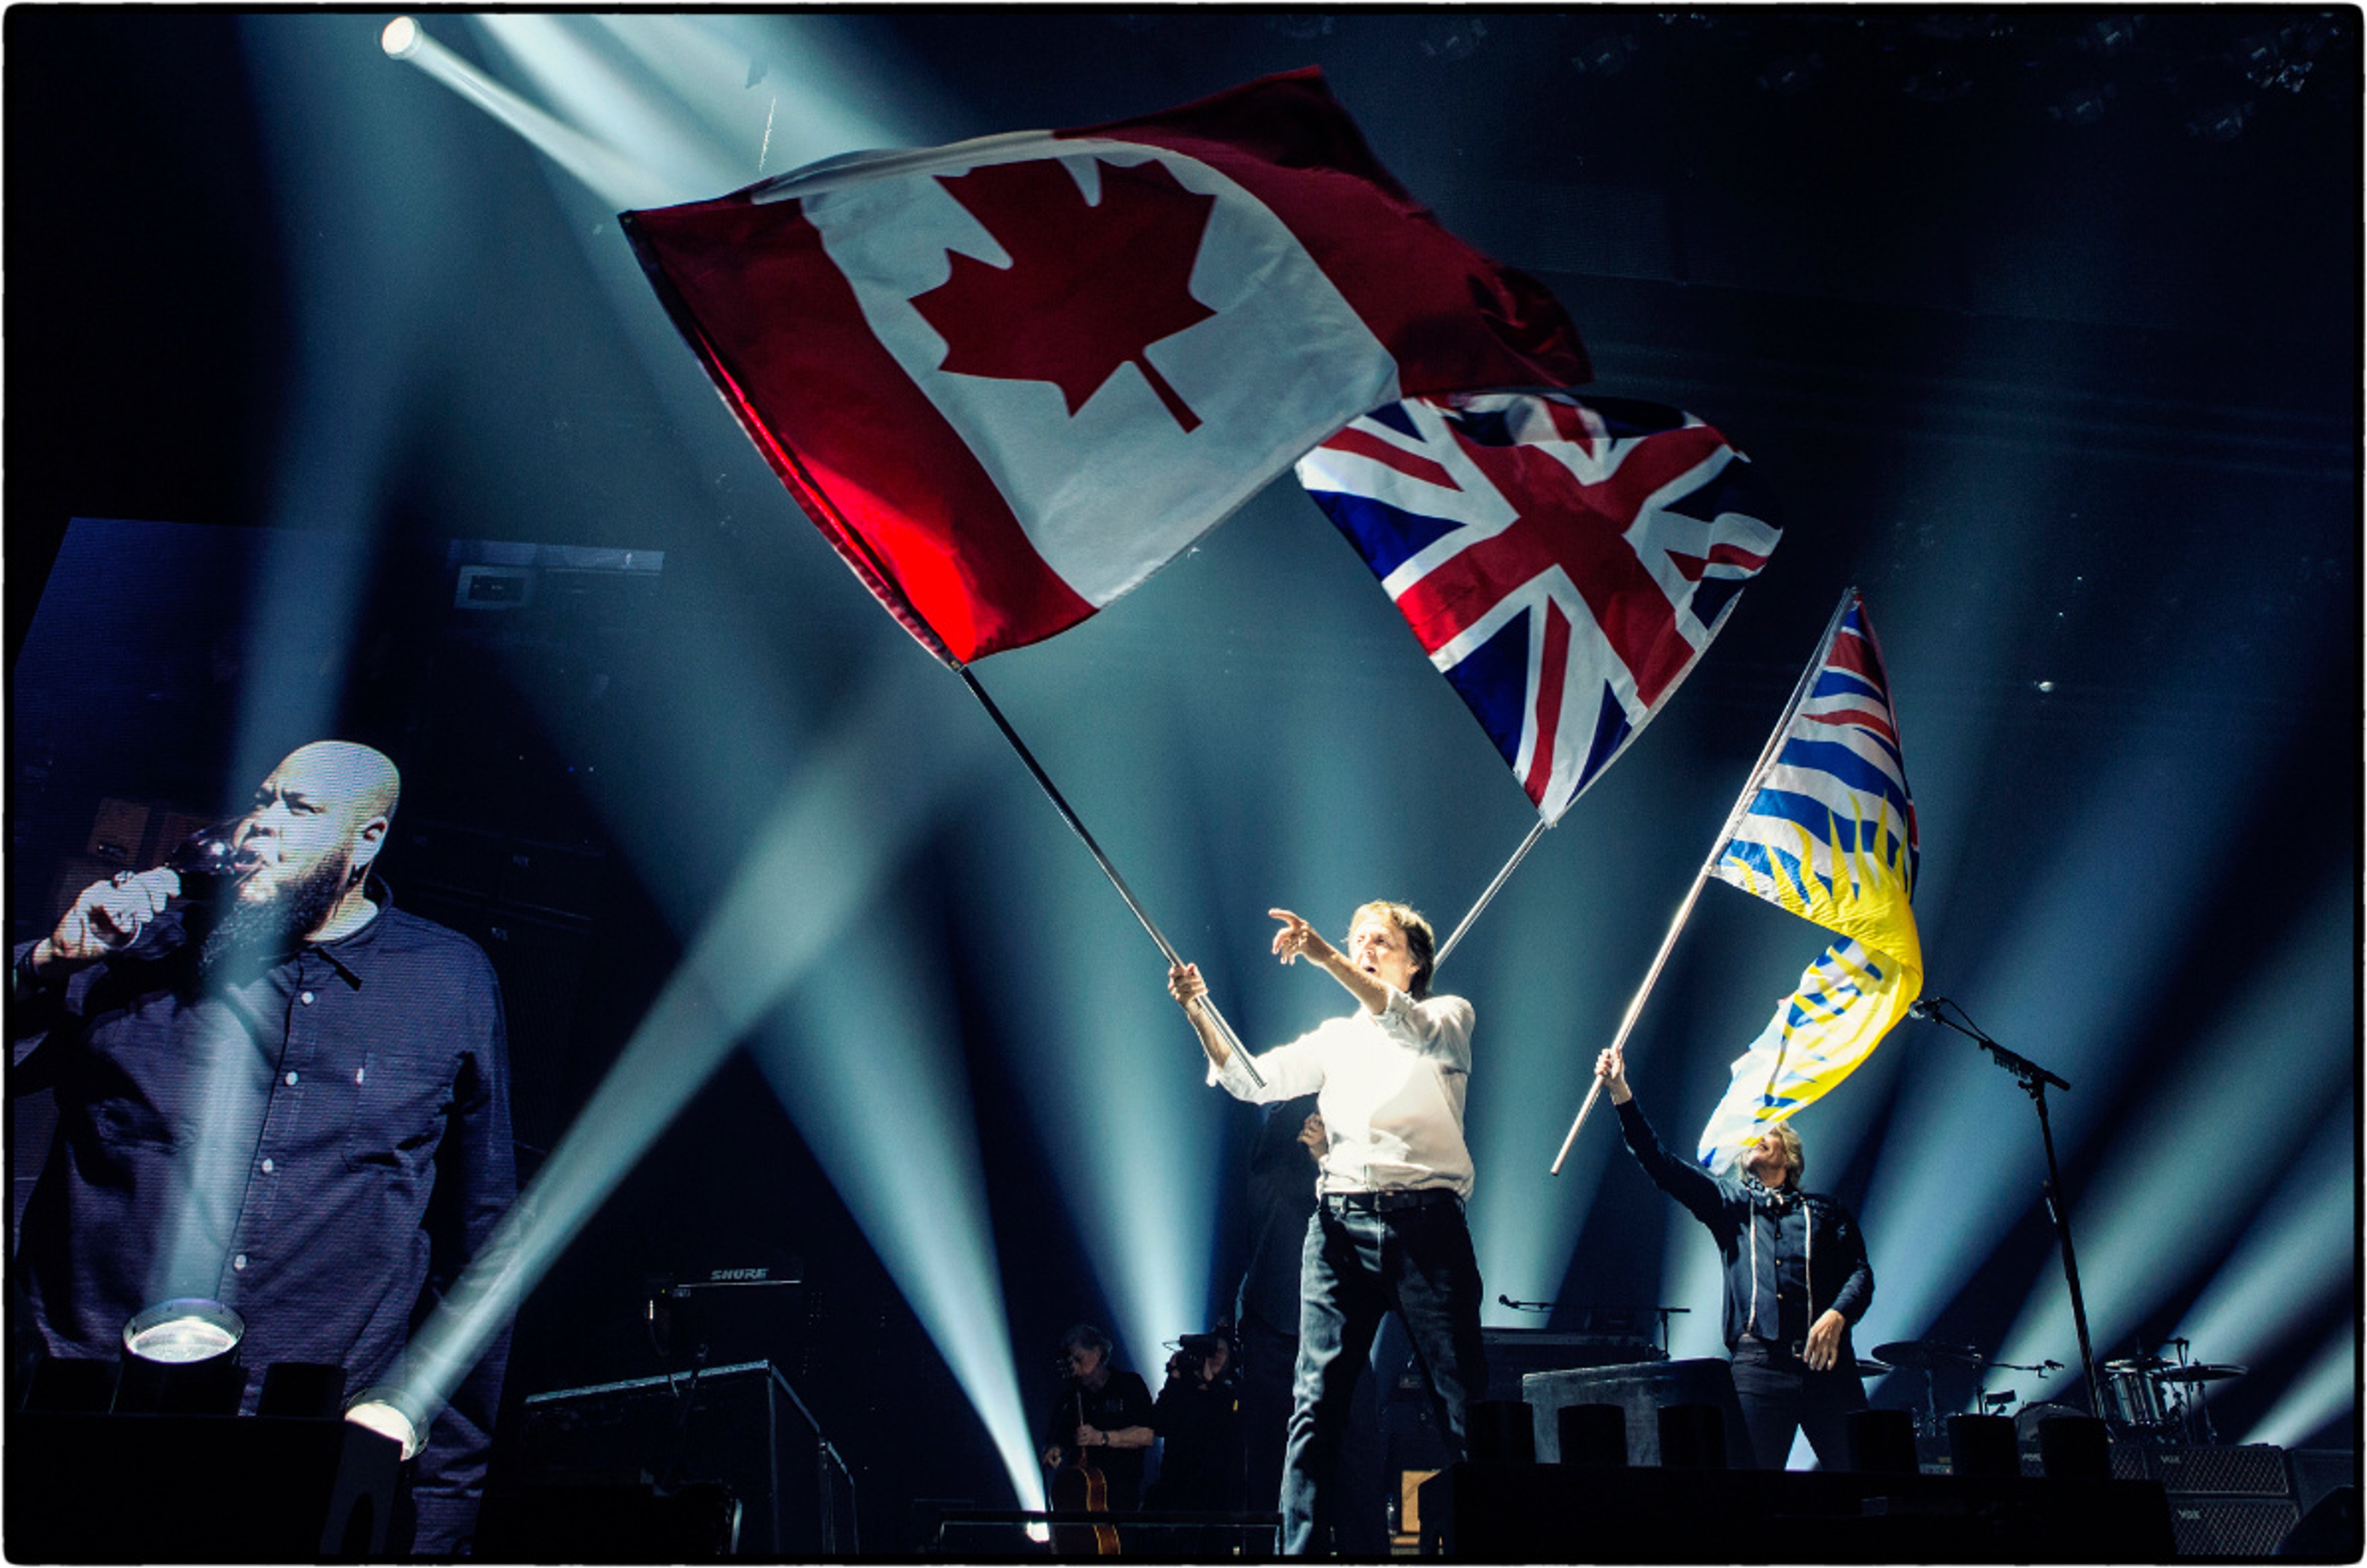 Paul's 'One On One' tour at the Rogers Arena, Vancouver